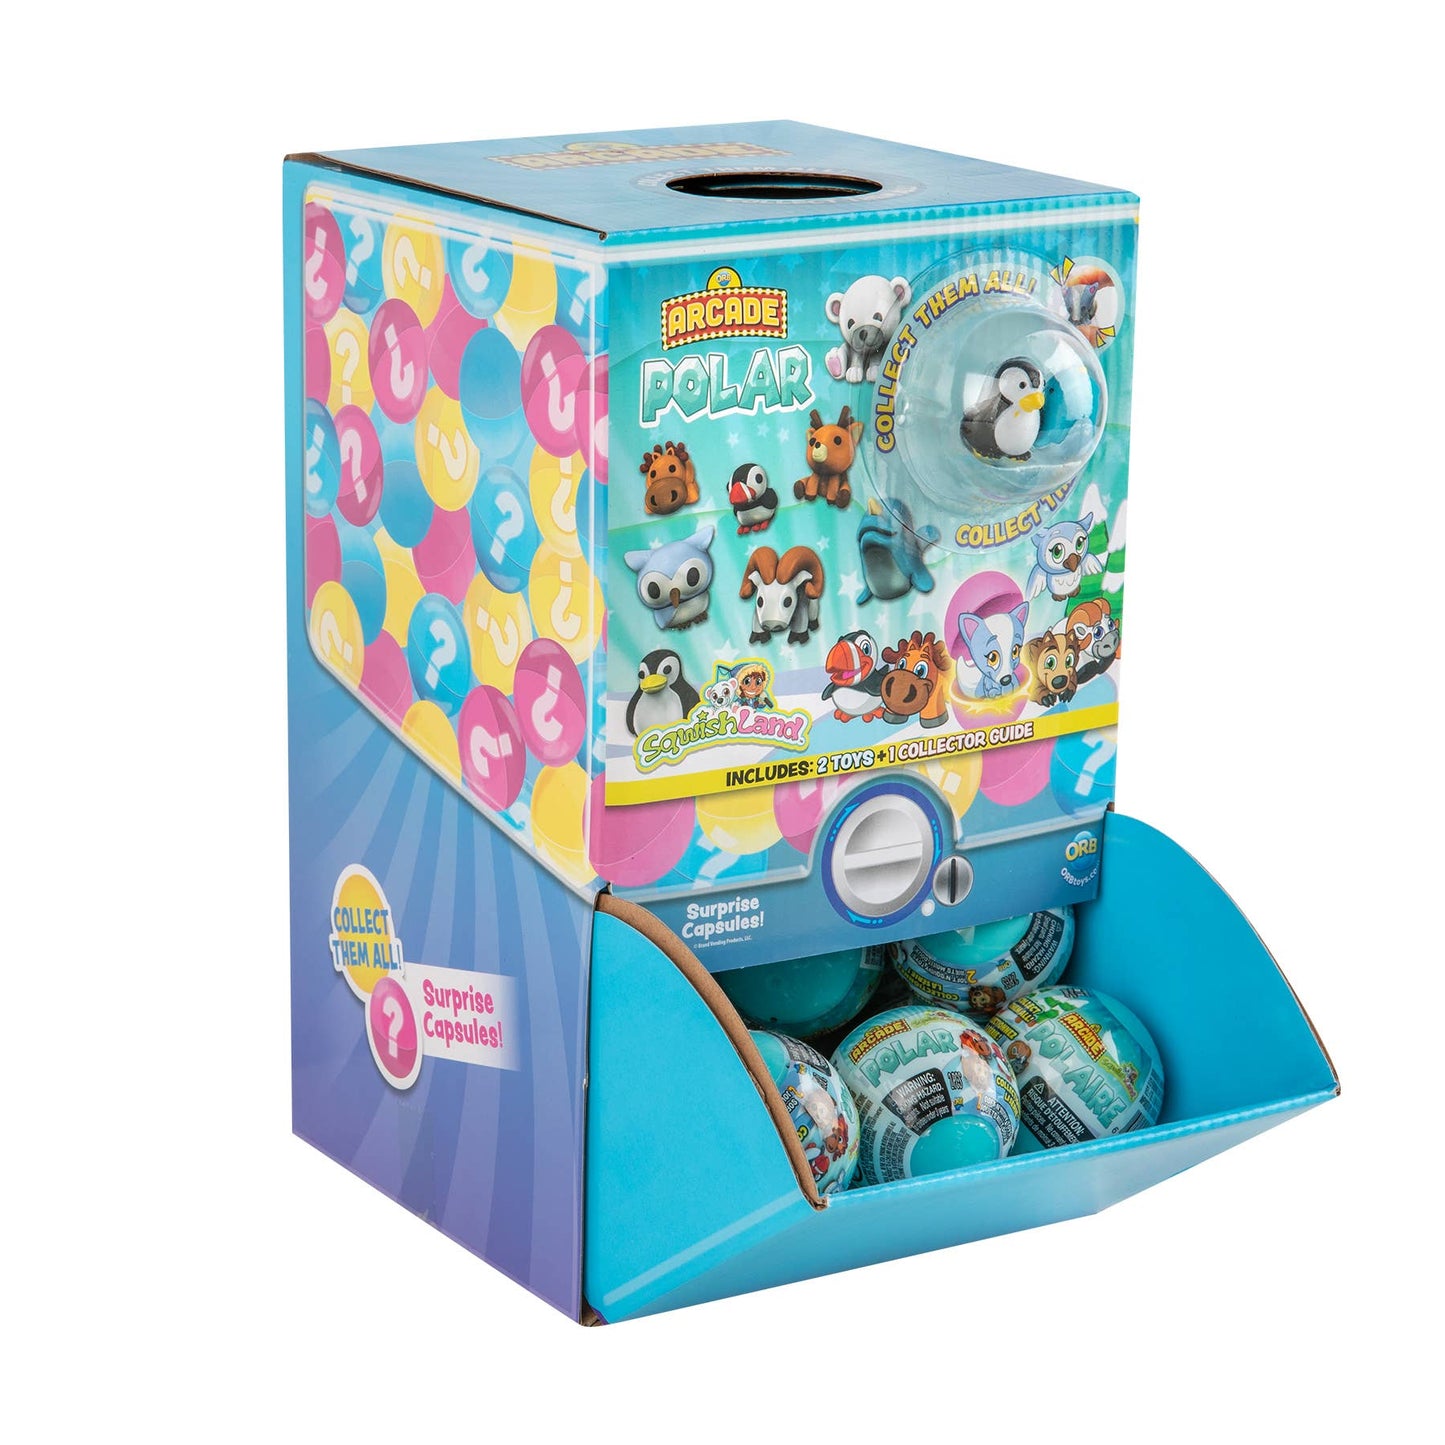 ORB Arcade™ Capsules Sqwishland Polar Collection PDQ